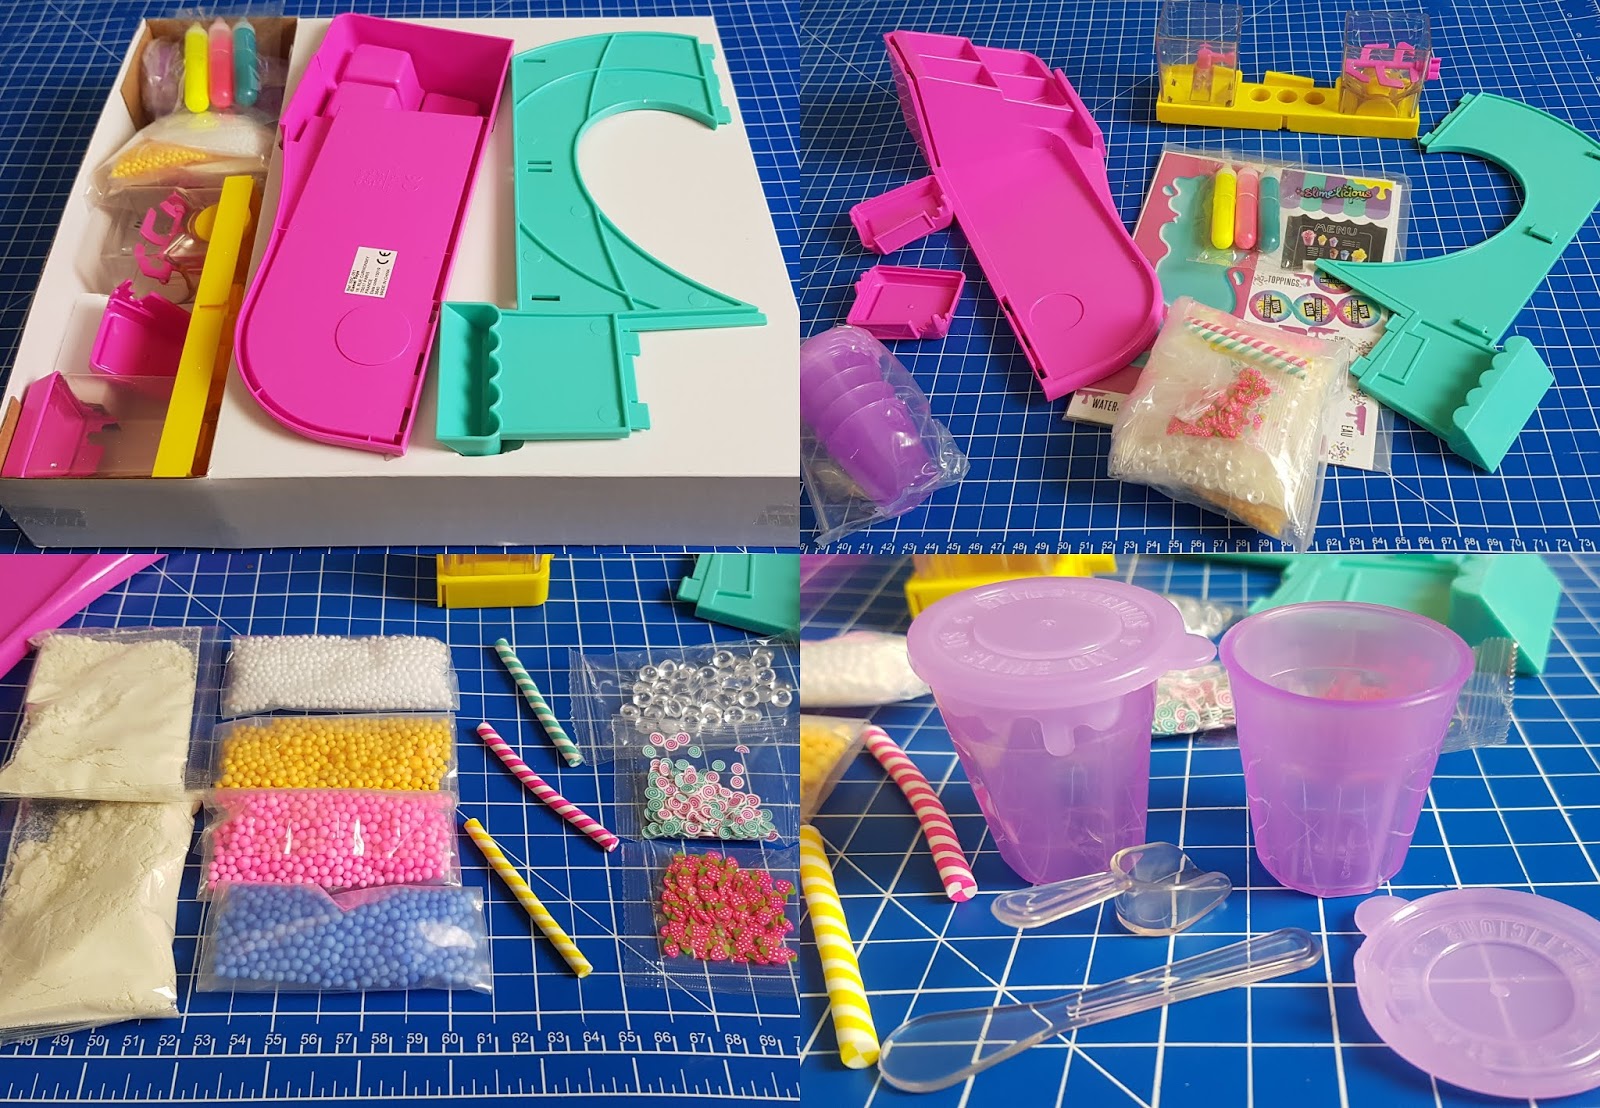 The Brick Castle: So Slime DIY Slimelicious Station Review and UK